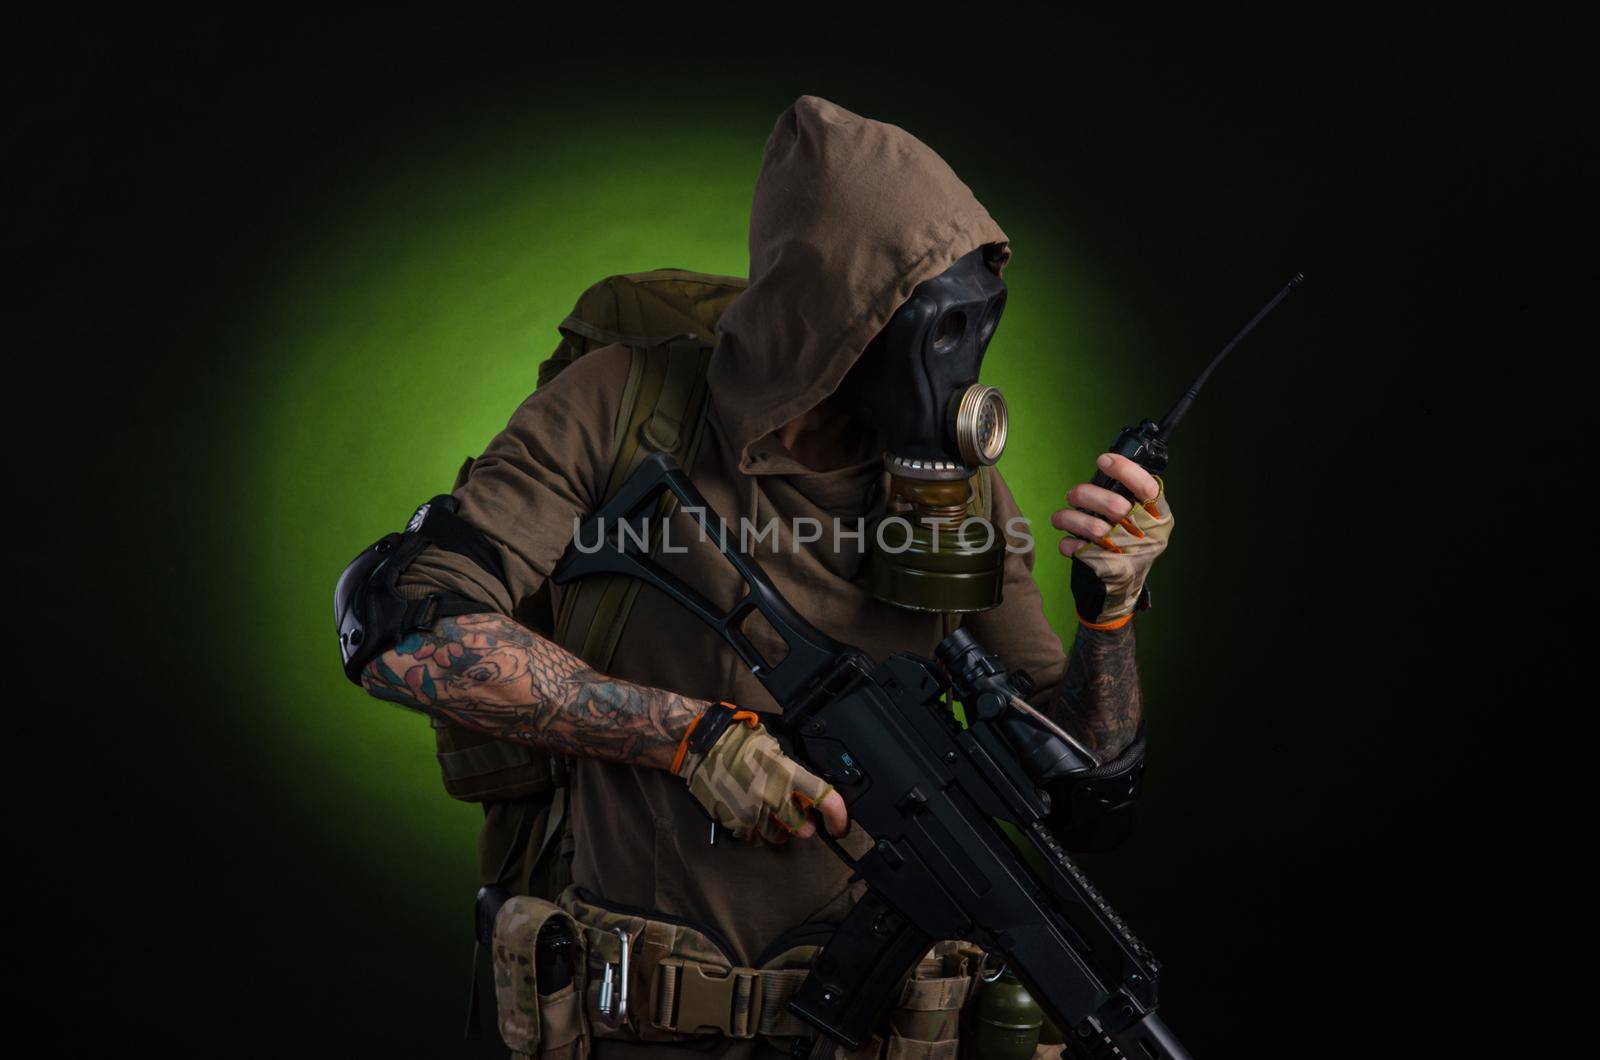 man Stalker with a gun with a telescopic sight and a backpack in a gas mask on a dark background with emotions looking, aiming, watching, sneaking